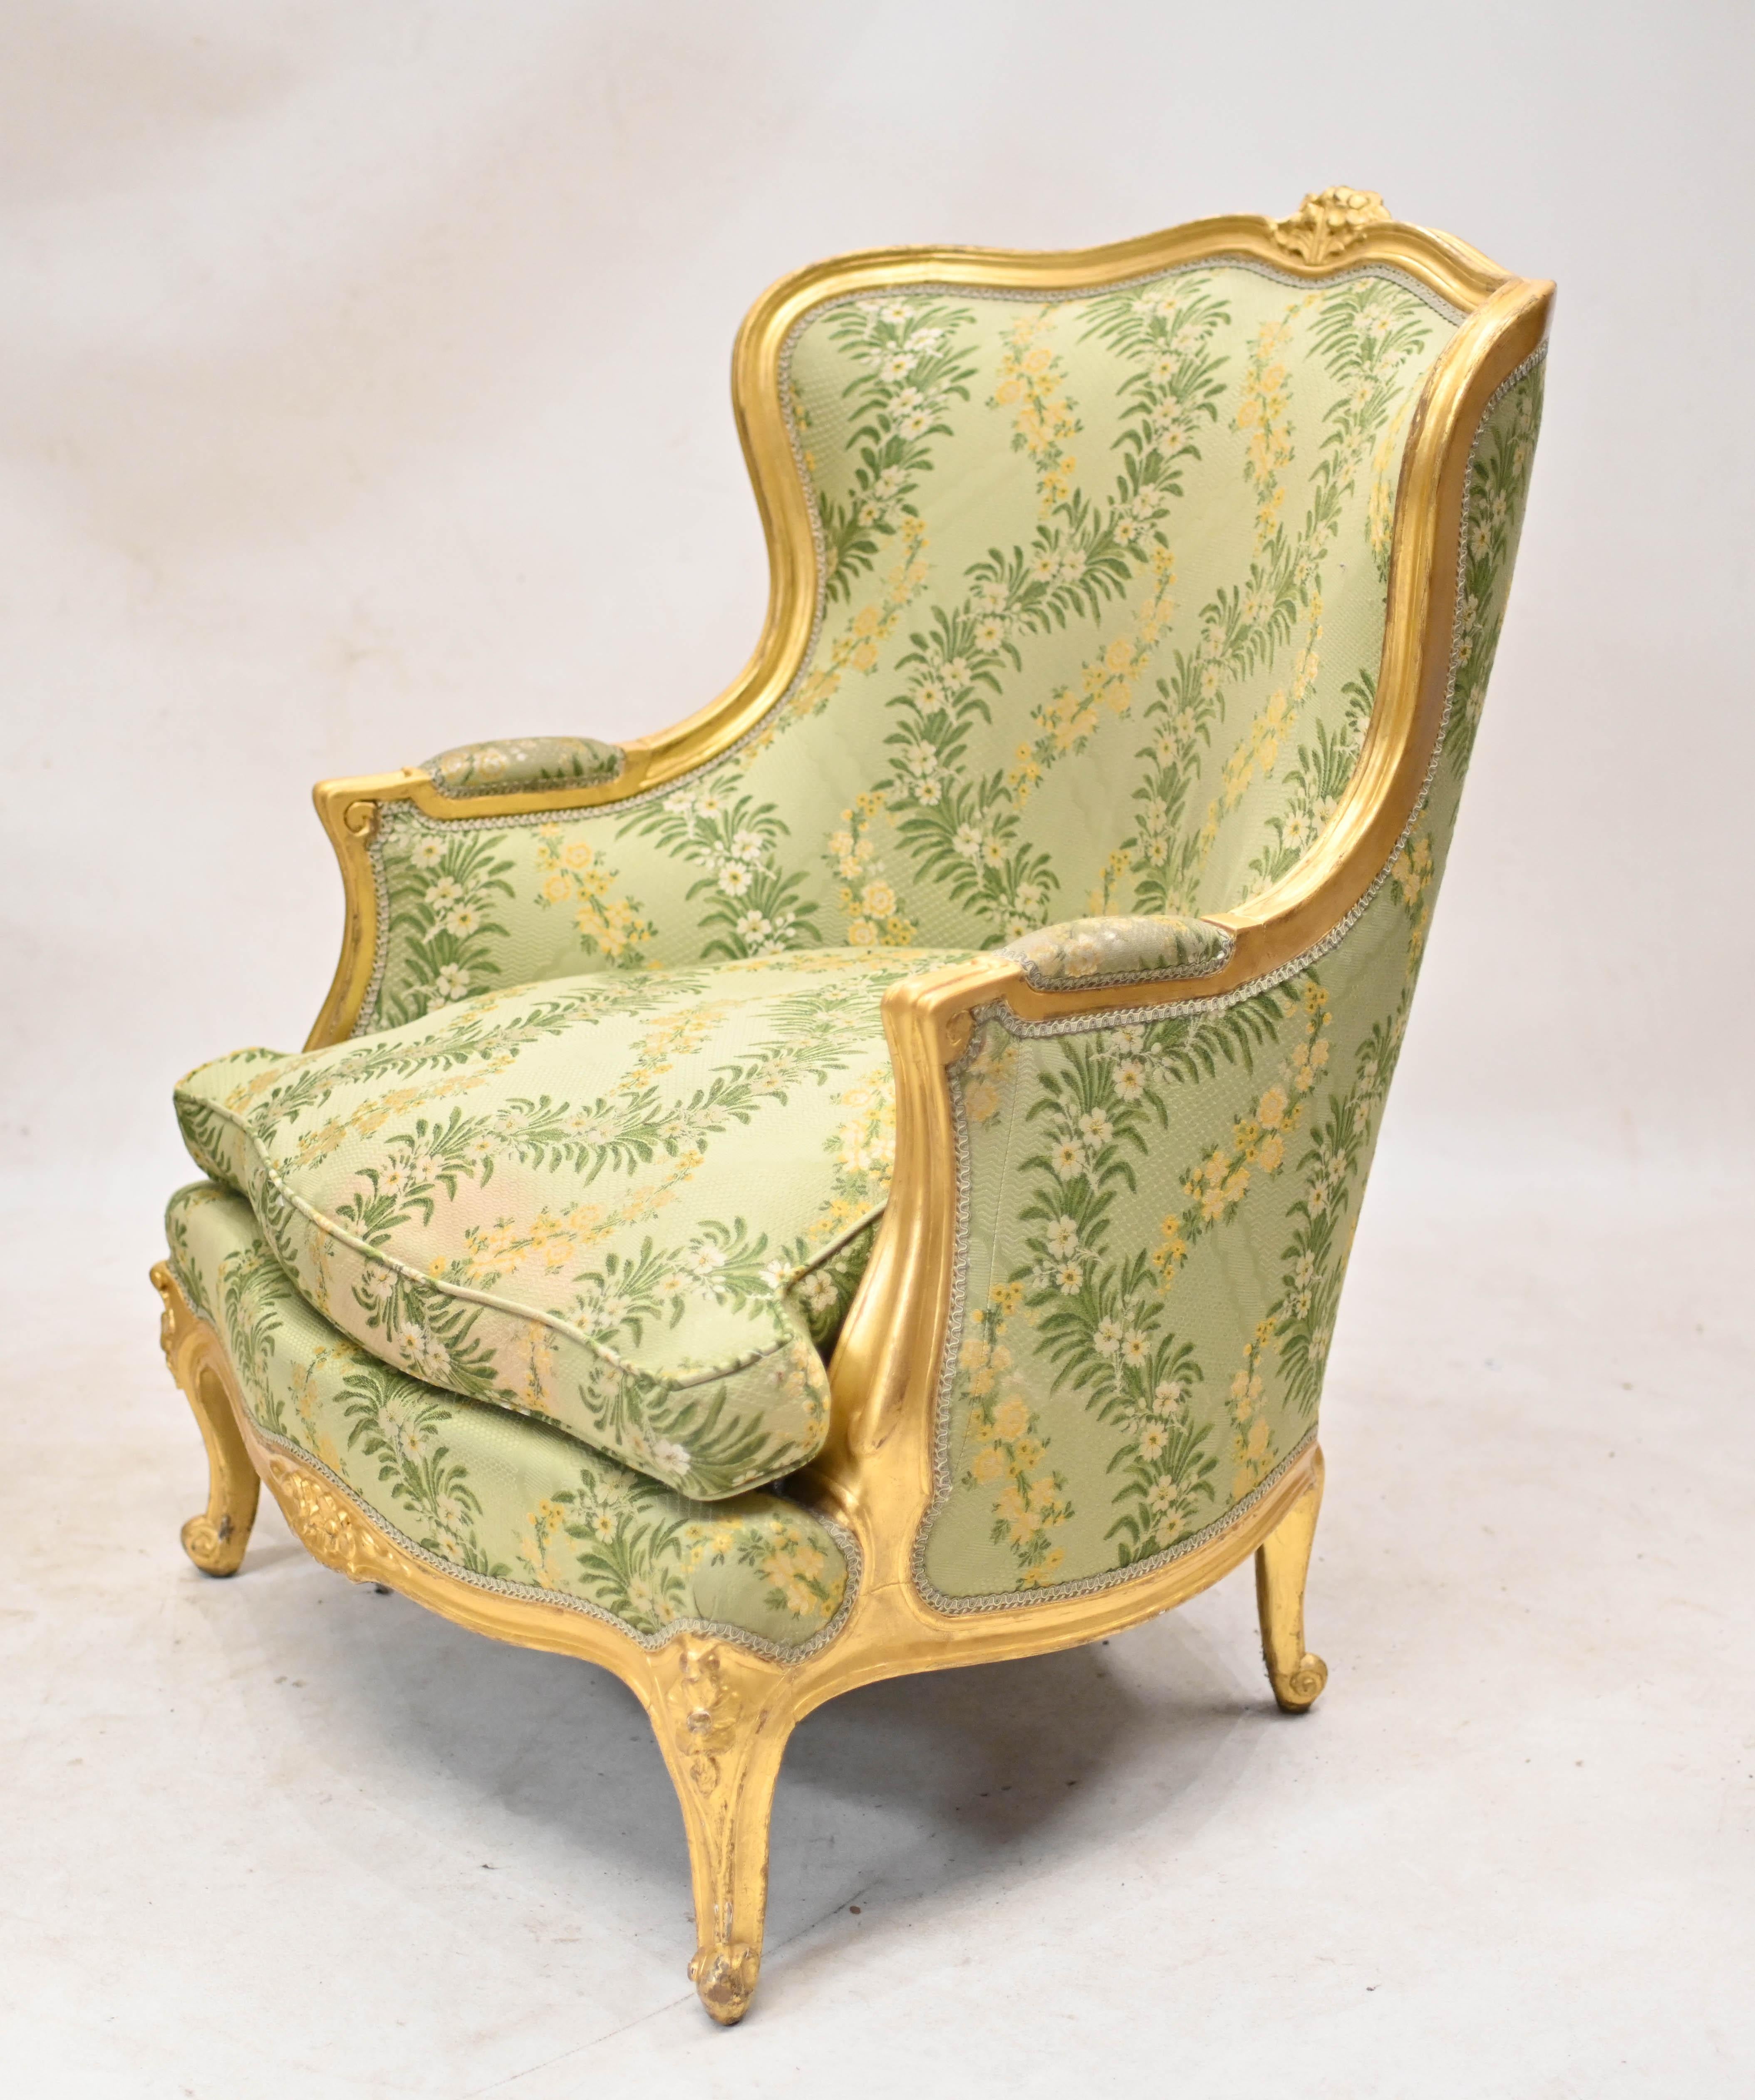 Gorgeous pair of French gilt arm chairs
Classic pair of fauteuils with a tub design
Just reupholstered with lovely green floral fabric
Clean from previous owners smells such as pets and smoke (as new upholstery)
Great interiors pair
Very comfortable